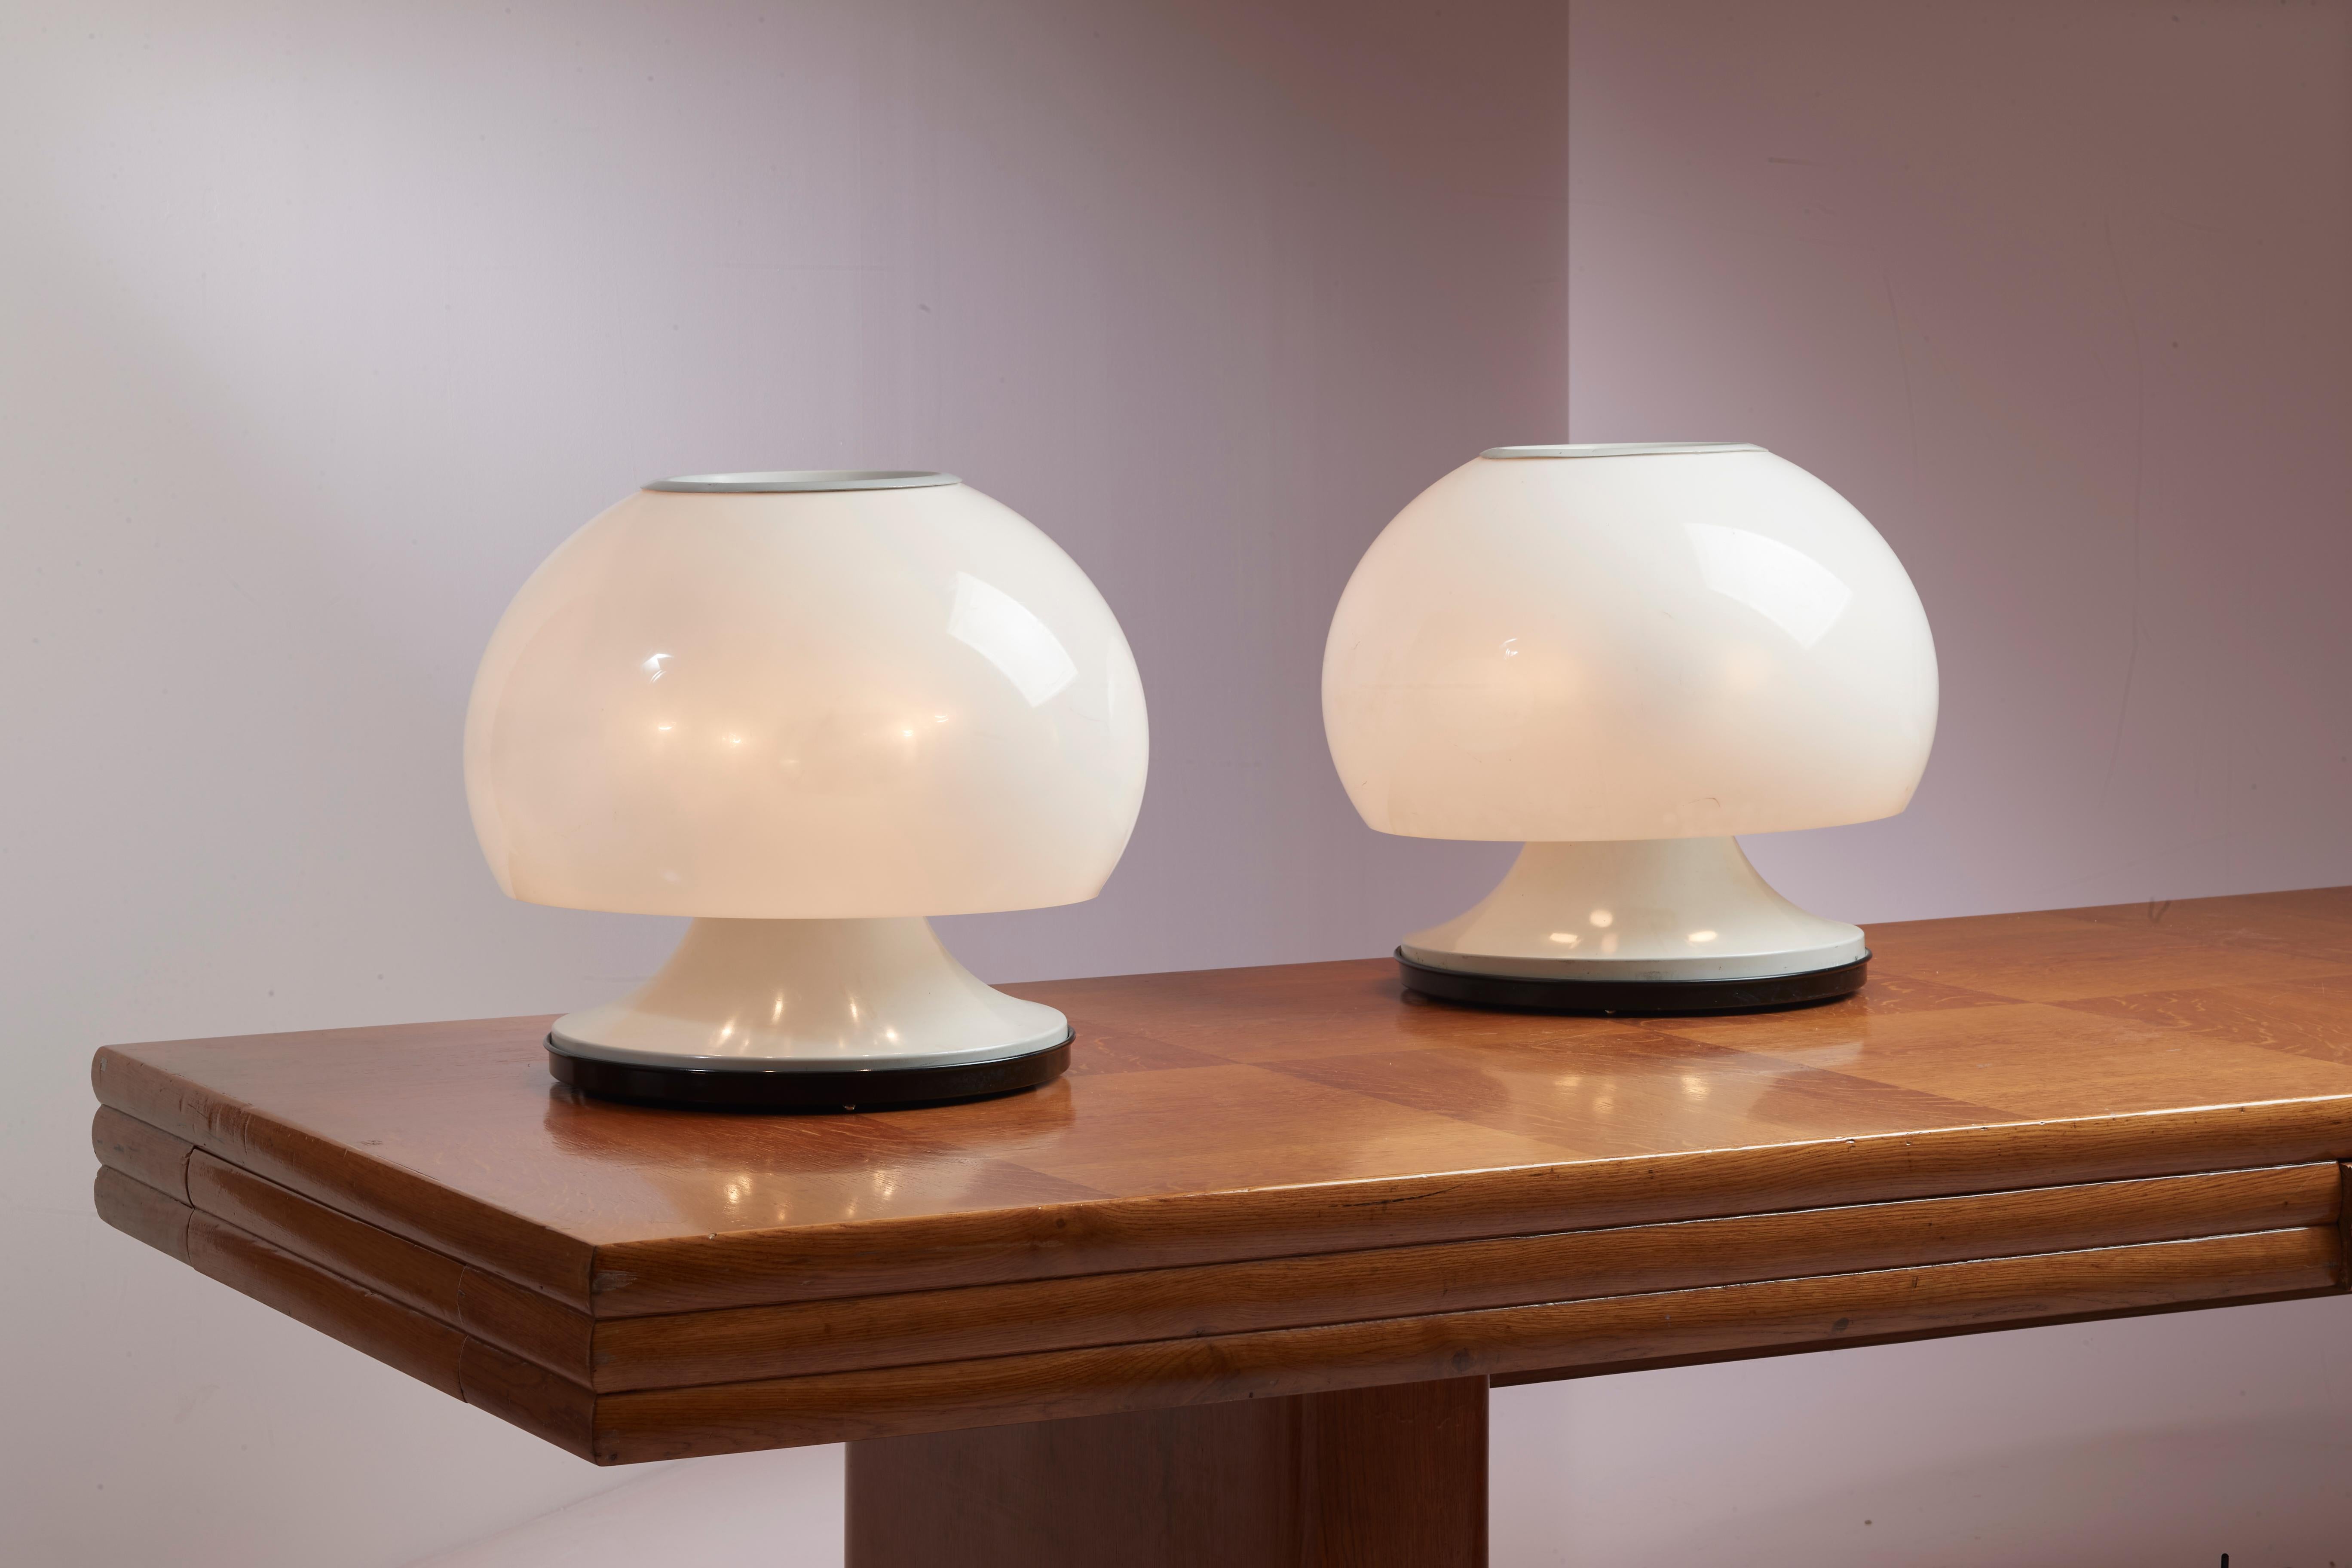 A pair of large table lamps, Model 596 from the 1960s, skilfully crafted in perspex and metal by Arteluce, with a design by Gino Sarfatti.

These Italian lamps, both decorative and striking, showcase the versatility of Perspex, an acrylic material